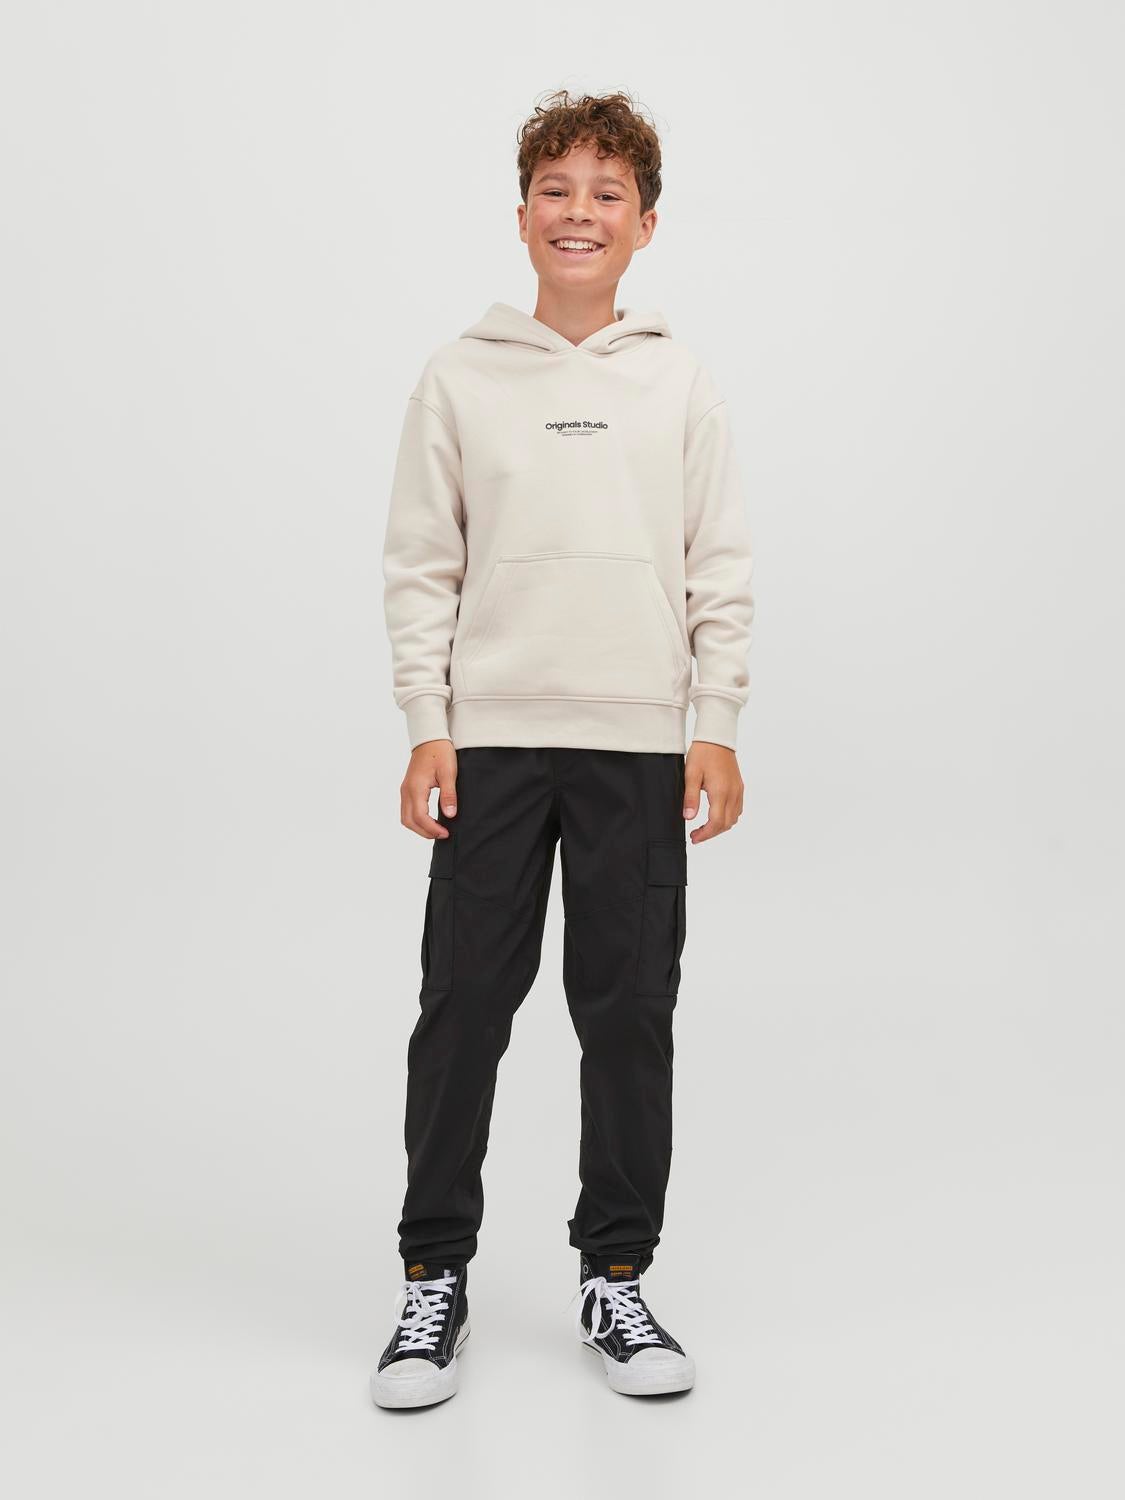 Cargo trousers For boys